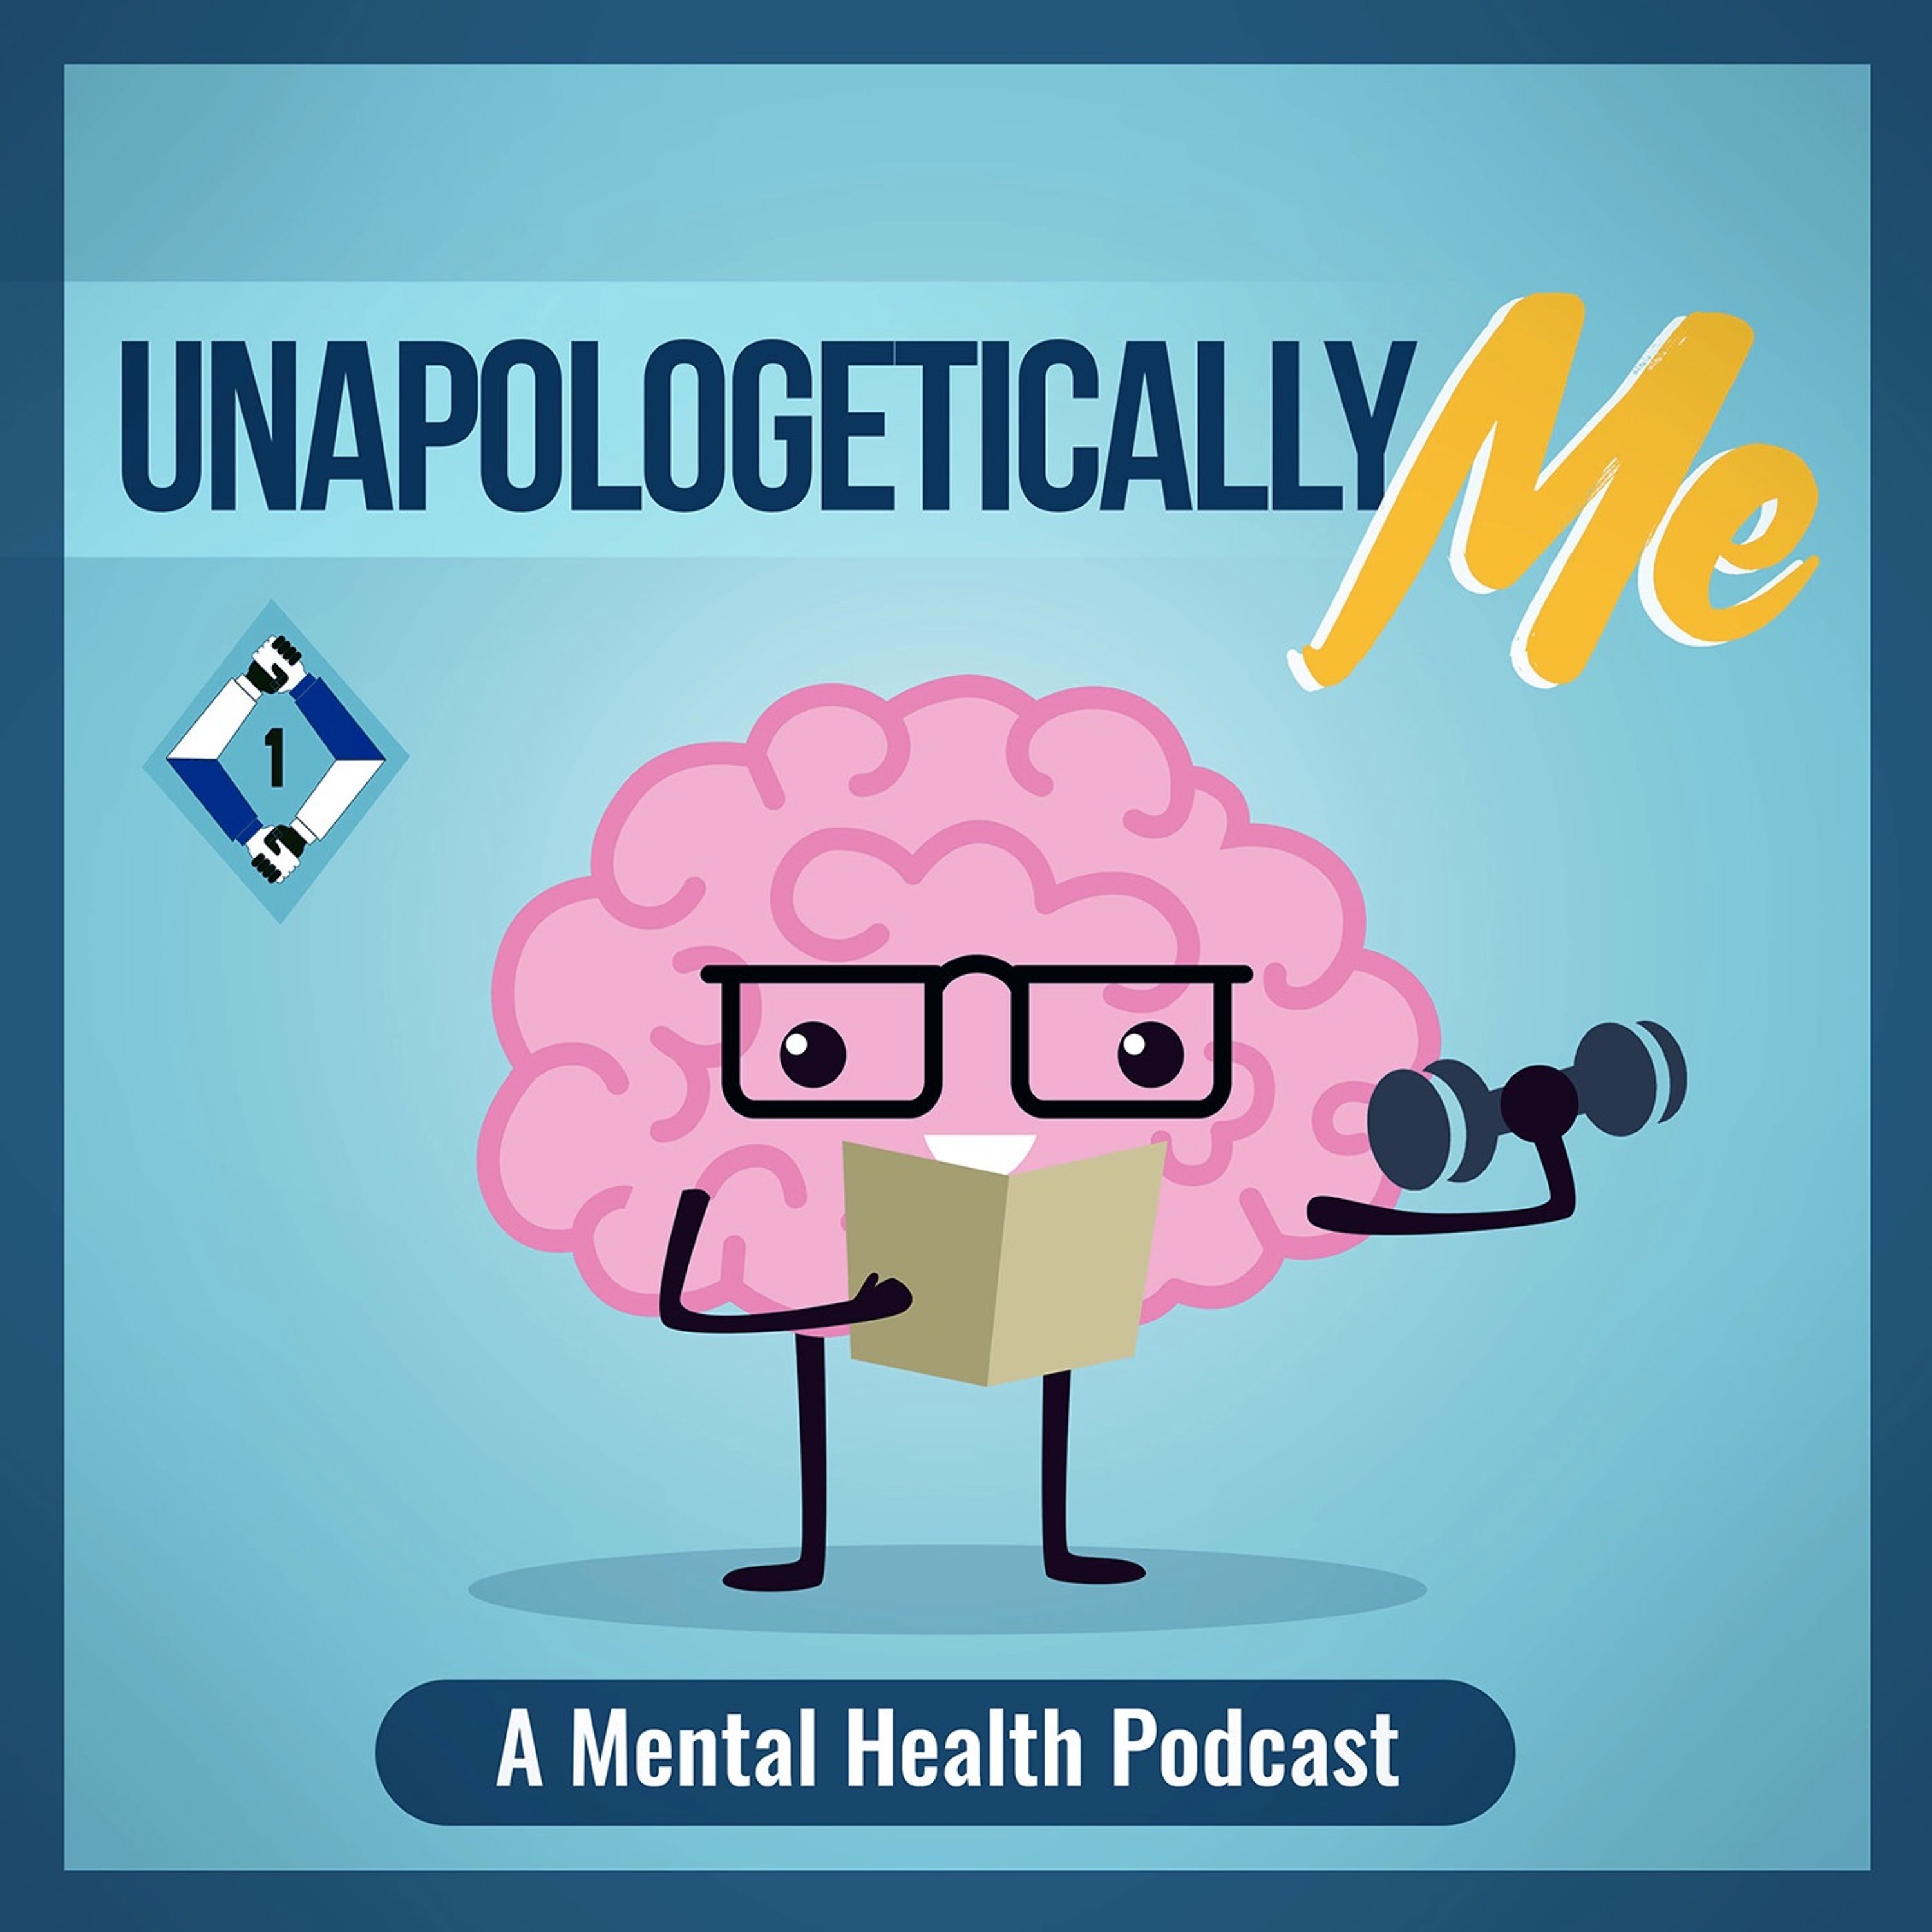 Unapologetically Me: A Mental Health Podcast - Stories From Around The World